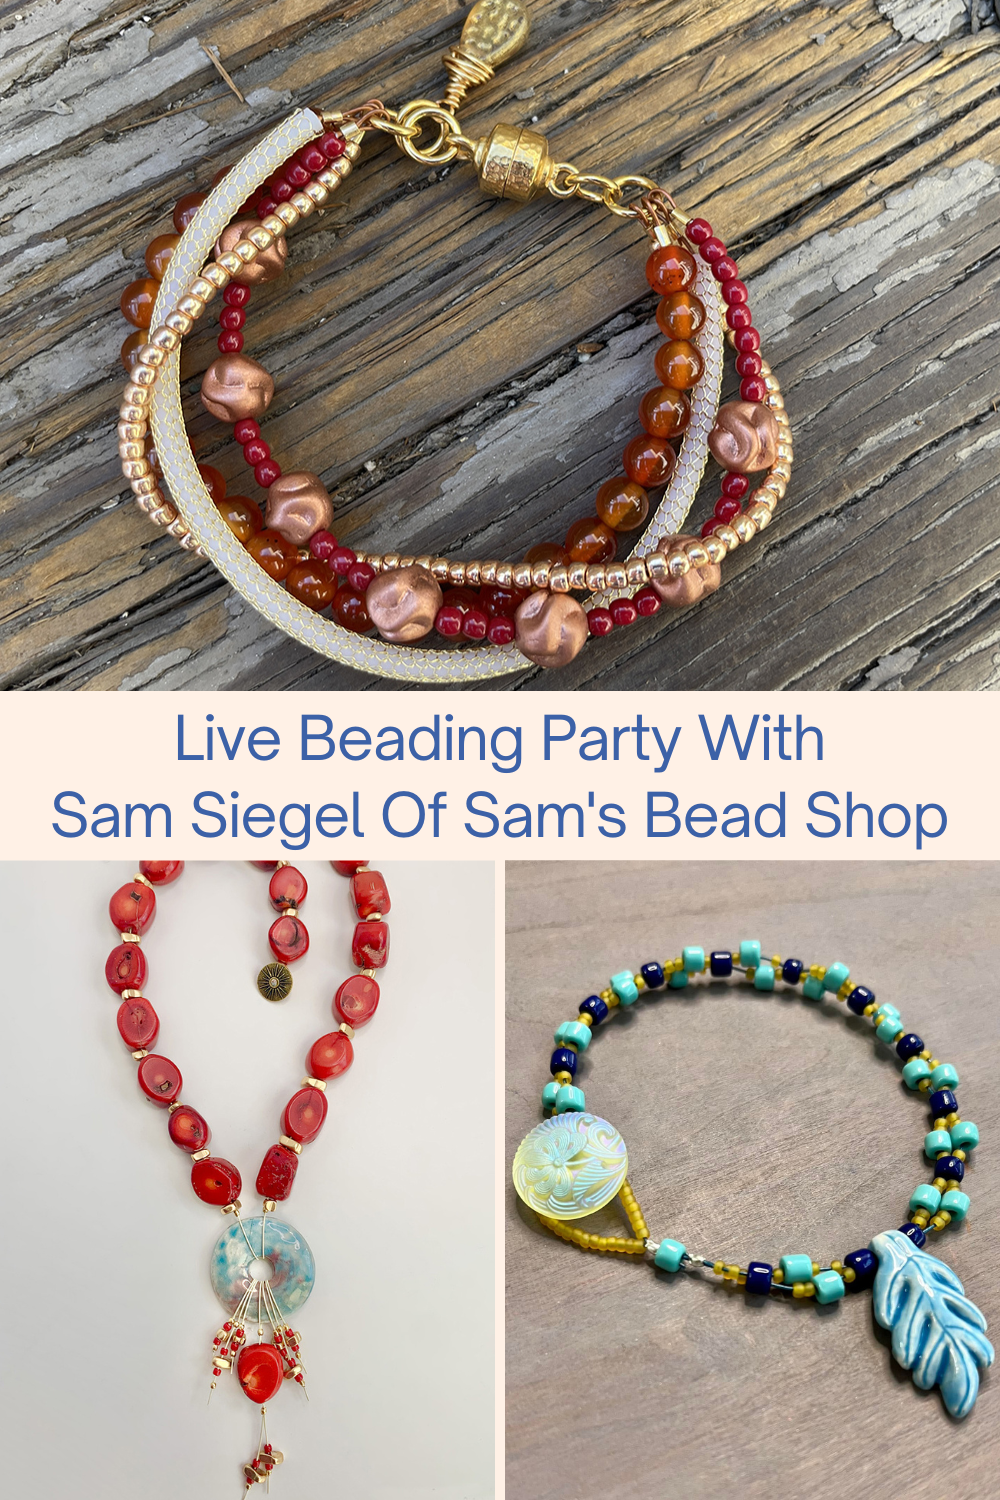 Live Beading Party With Sam Siegel Of Sam's Bead Shop Collage